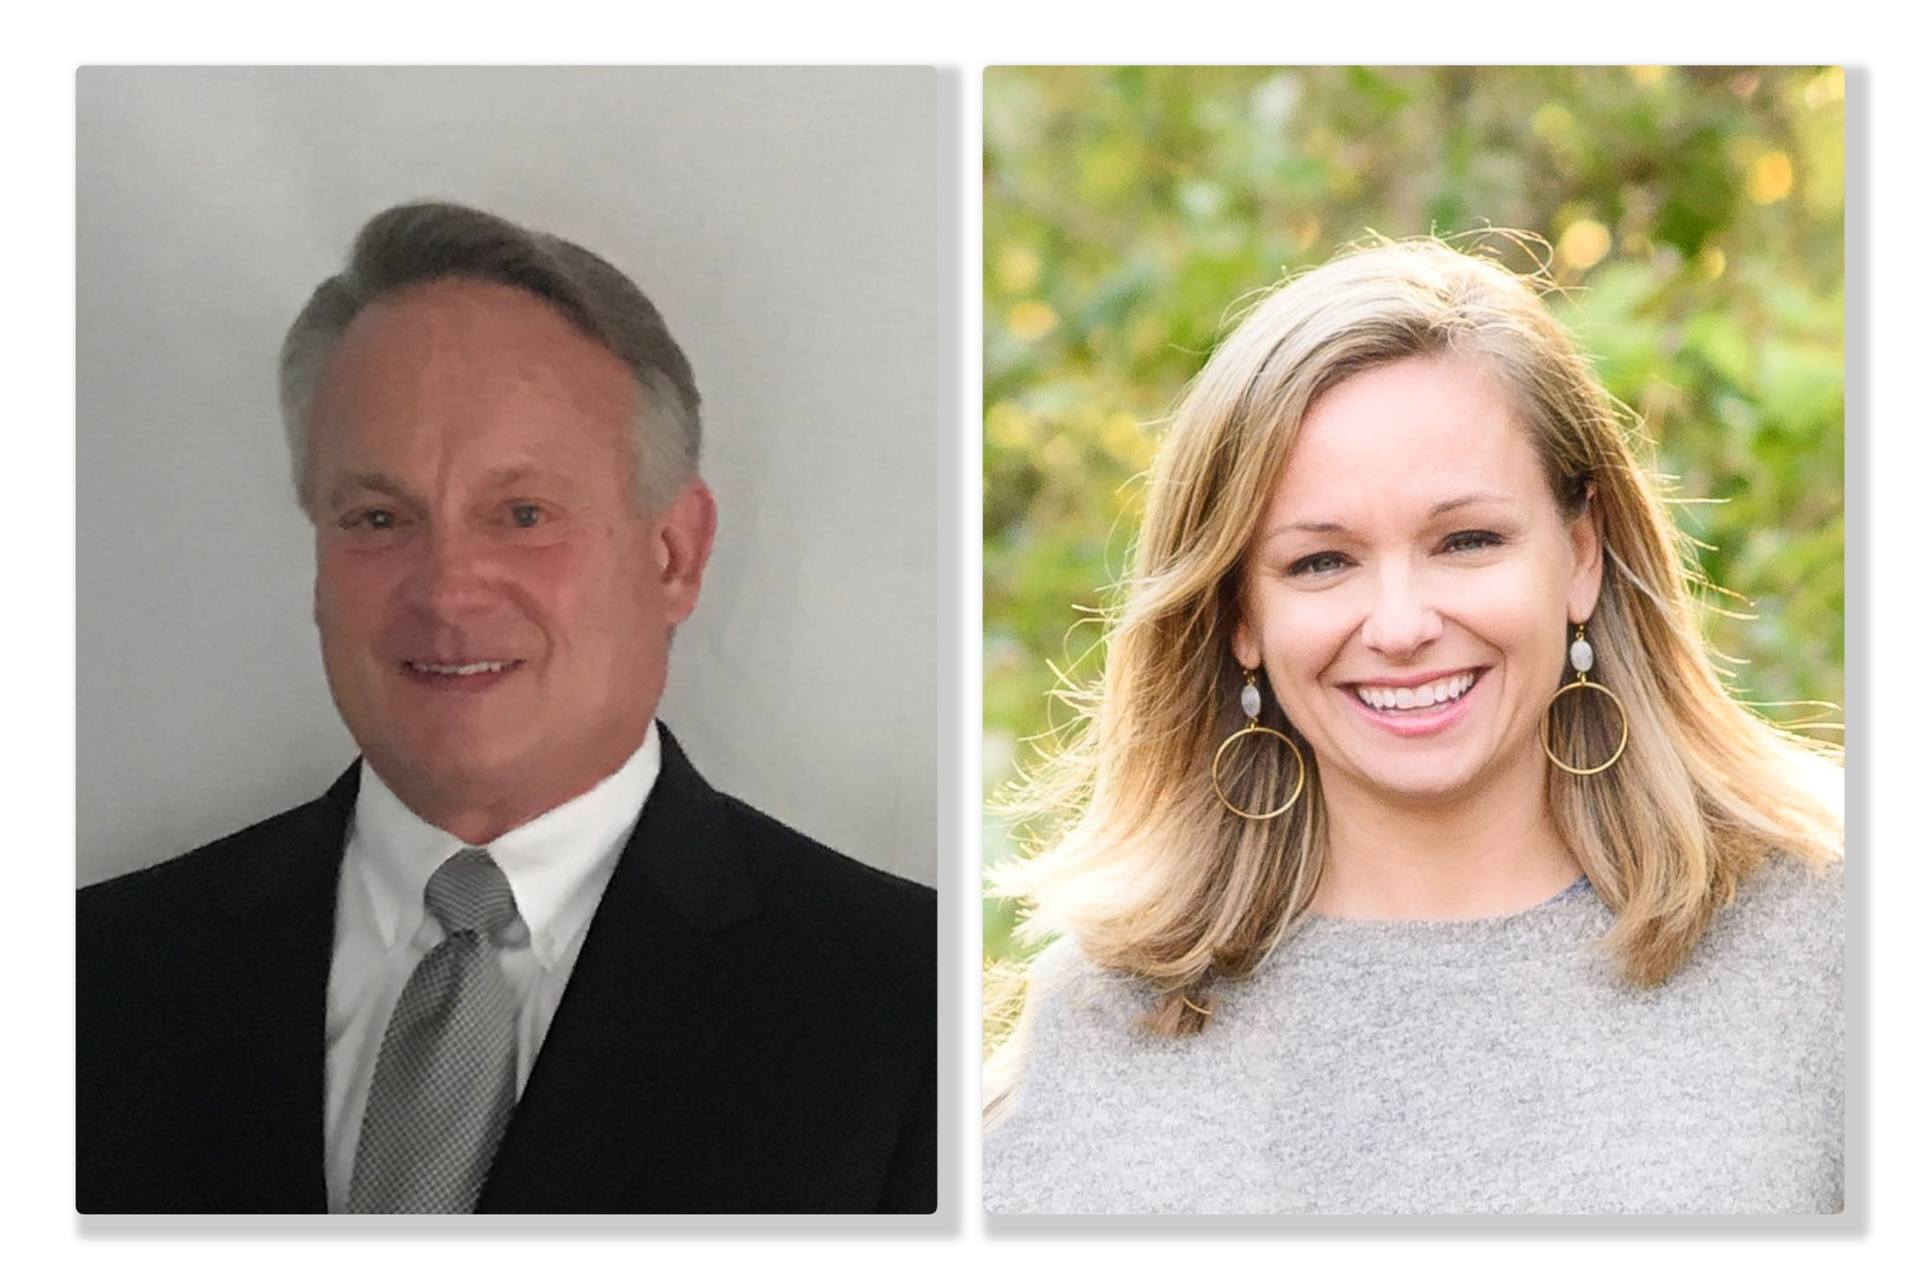 CoachSafely Foundation Strengthens Its Executive Leadership Team